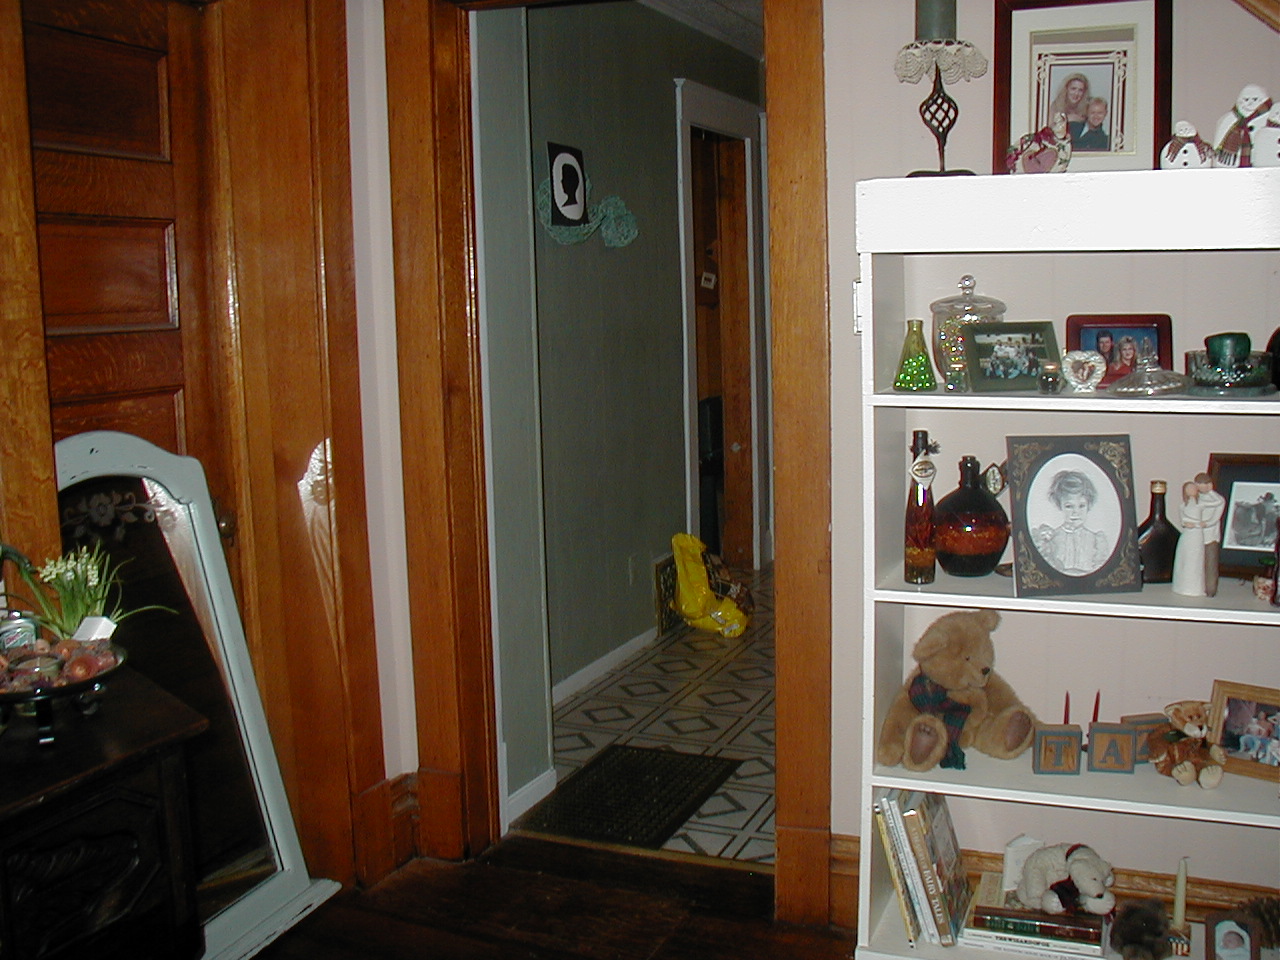  Tony Pickman started taking pictures in their new house when he felt something was not right.  Notice his sketch of the little girl on the shelf. 